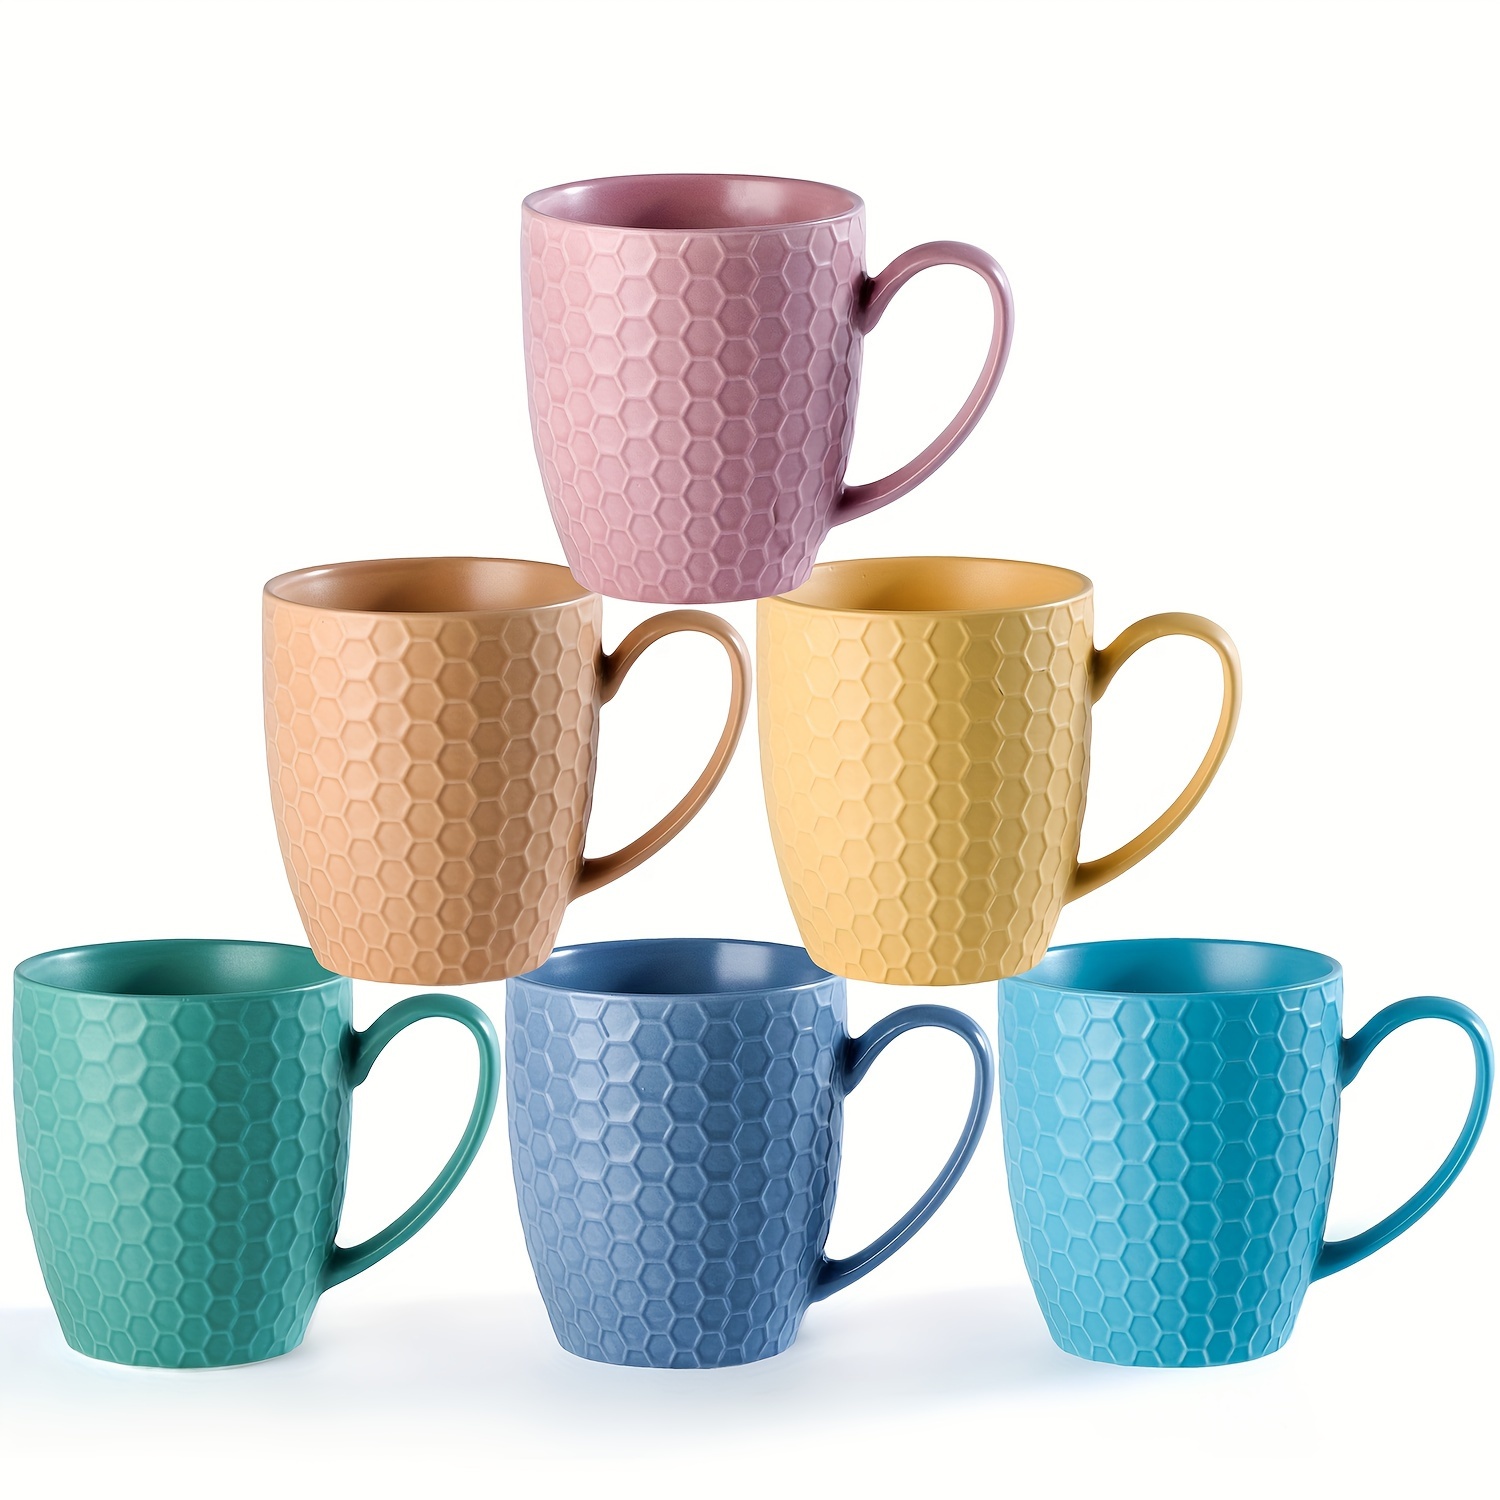 

18 Oz Ceramic Coffee Mug Set - Large Coffee Mugs - Matte Embossed Stoneware Cups With Handle For Latte Tea Cappuccino Cocoa - Microwave Dishwasher Safe - Set Of 6 - Multicolor